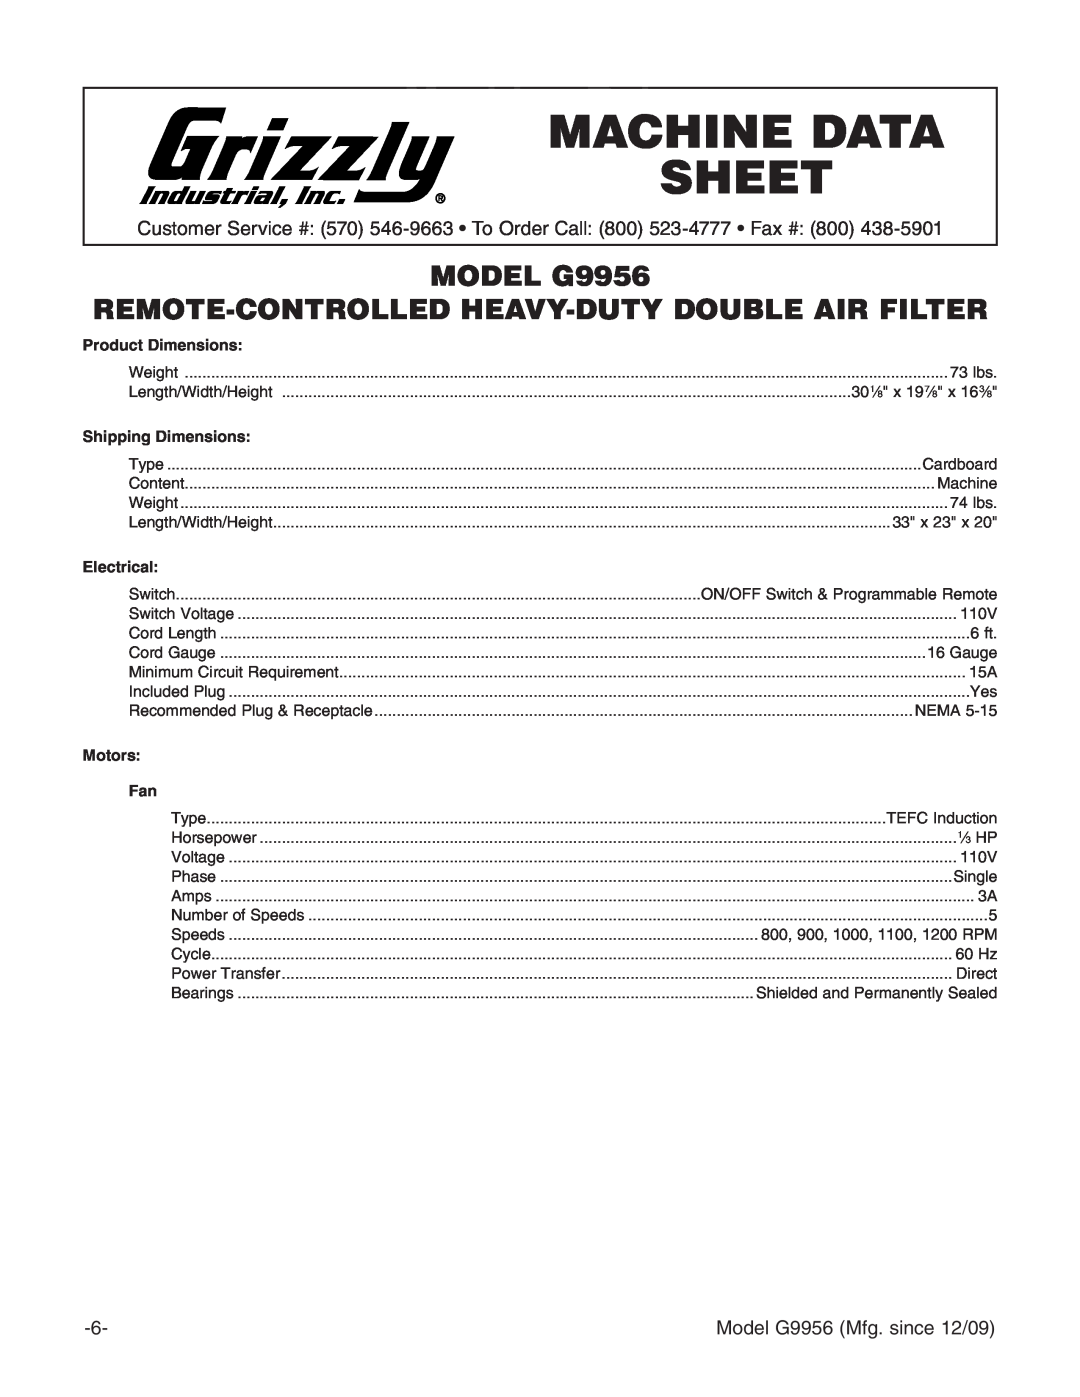 Grizzly mACHINe dATA SHeeT, Machine Data, model G9956, RemoTe-CoNTRolled HeAVY-dUTYdoUBle AIR FIlTeR, Electrical 